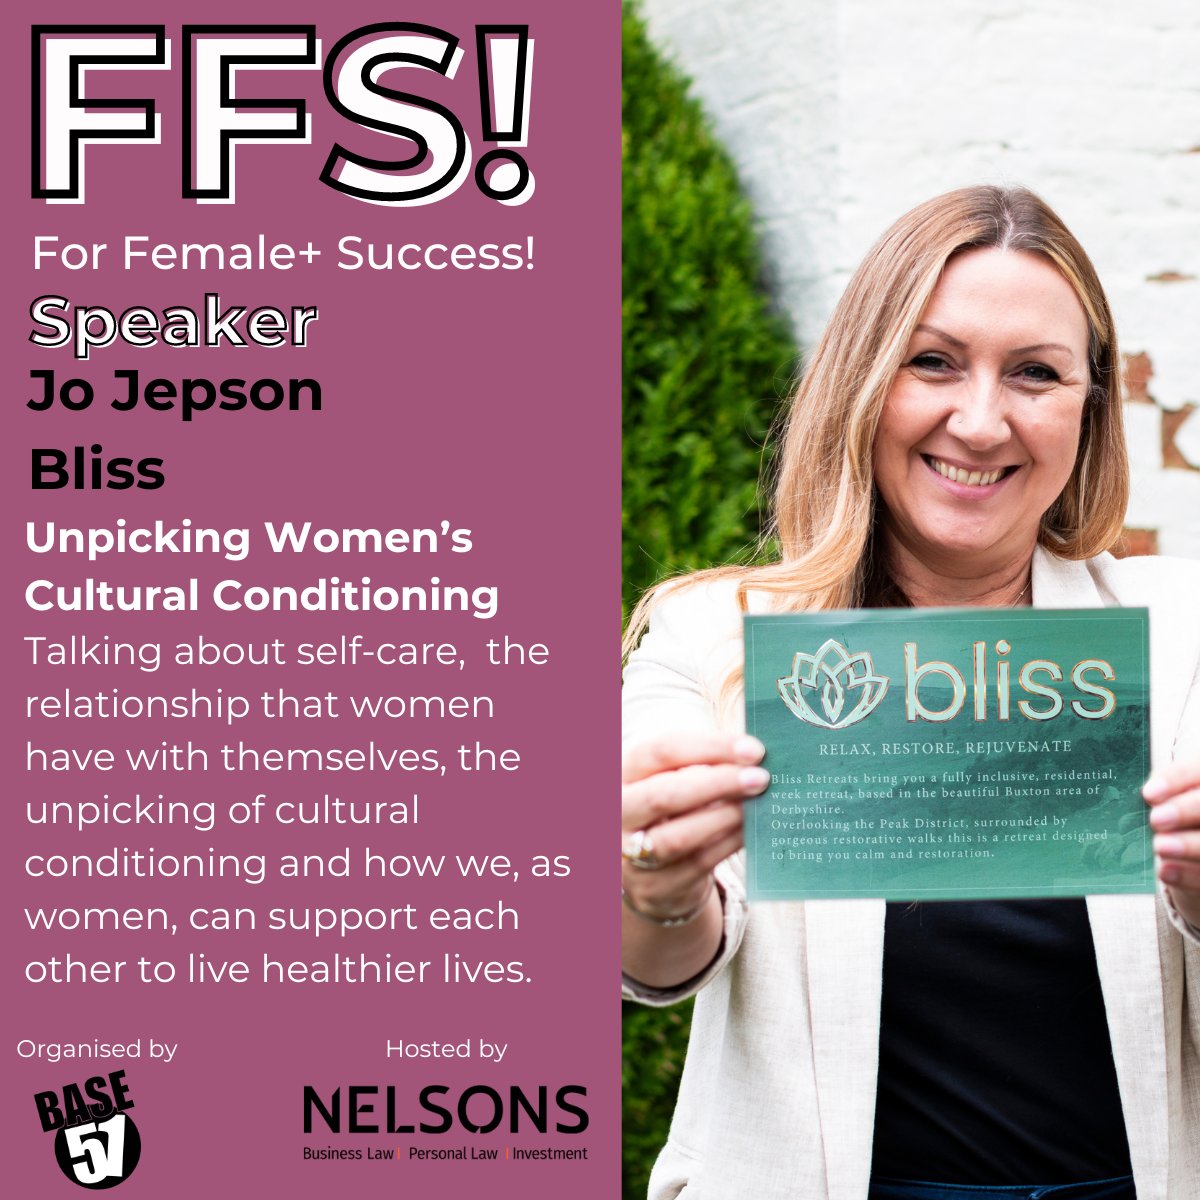 We are back at @Nelsons_Law on the 5th June for the next For Female+ Success event! Just £10 for drinks, nibbles, #networking, 4 amazing speakers and a friendly atmosphere 🙌 All raising funds for our work with young people in #Nottingham! base51.org/events